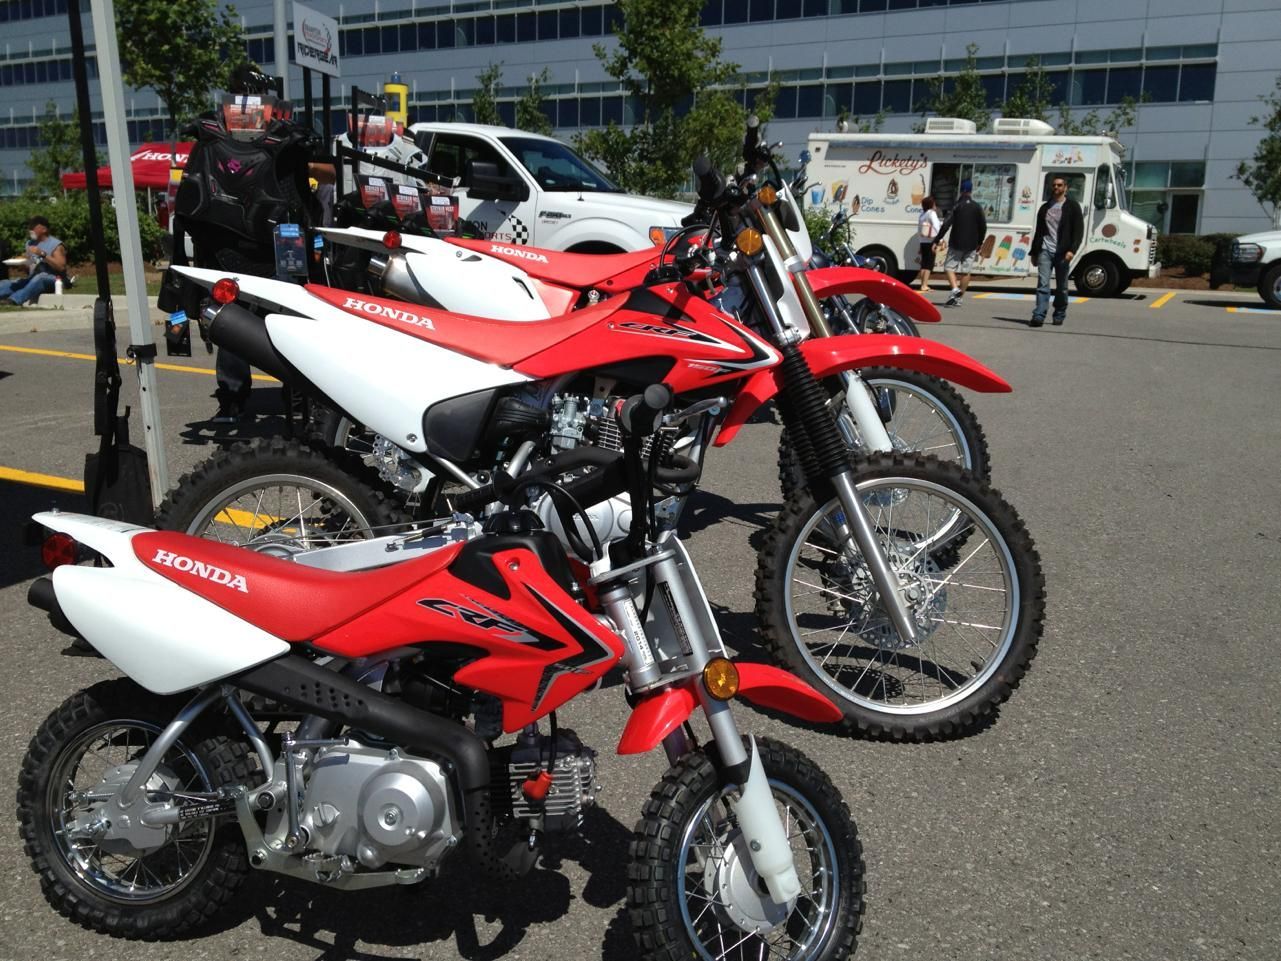 CRF 50, 150 and 450